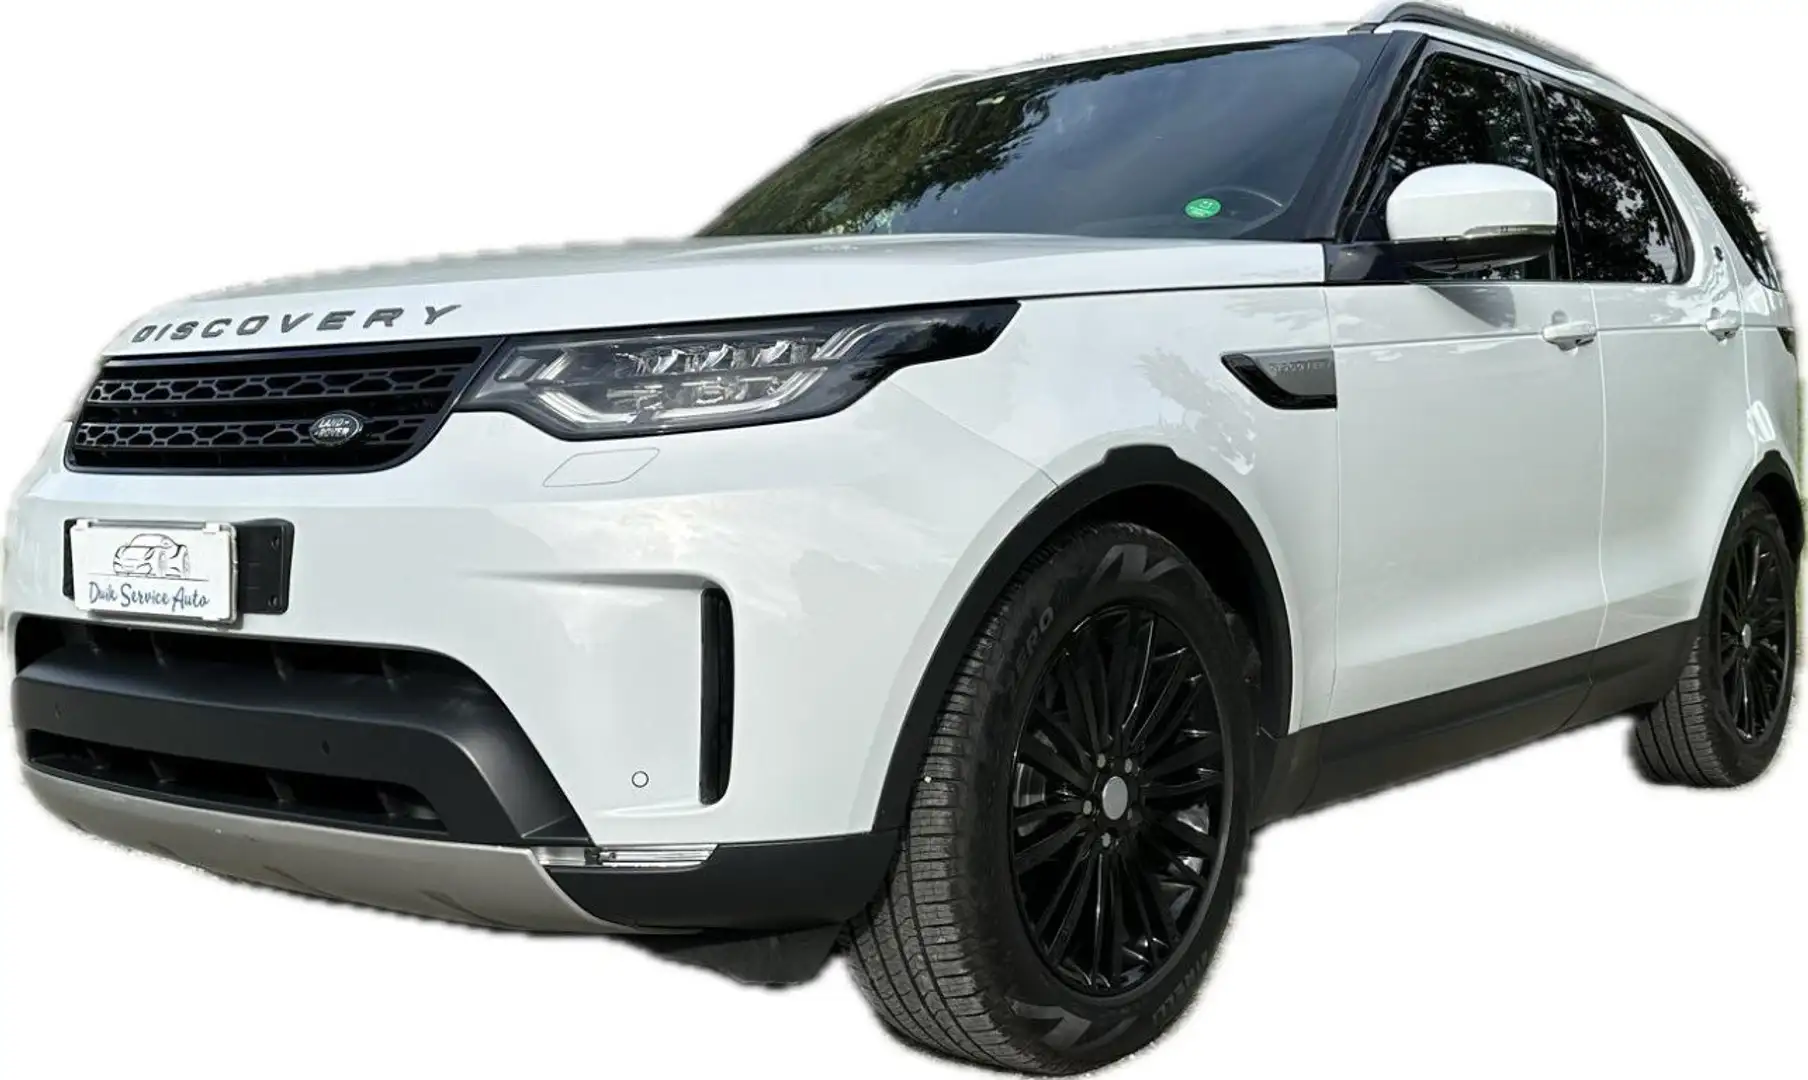 Land Rover Discovery V 2.0sd4 HSE LUXURY 7p Auto Motore Nuovo UFFICIALE Bianco - 1